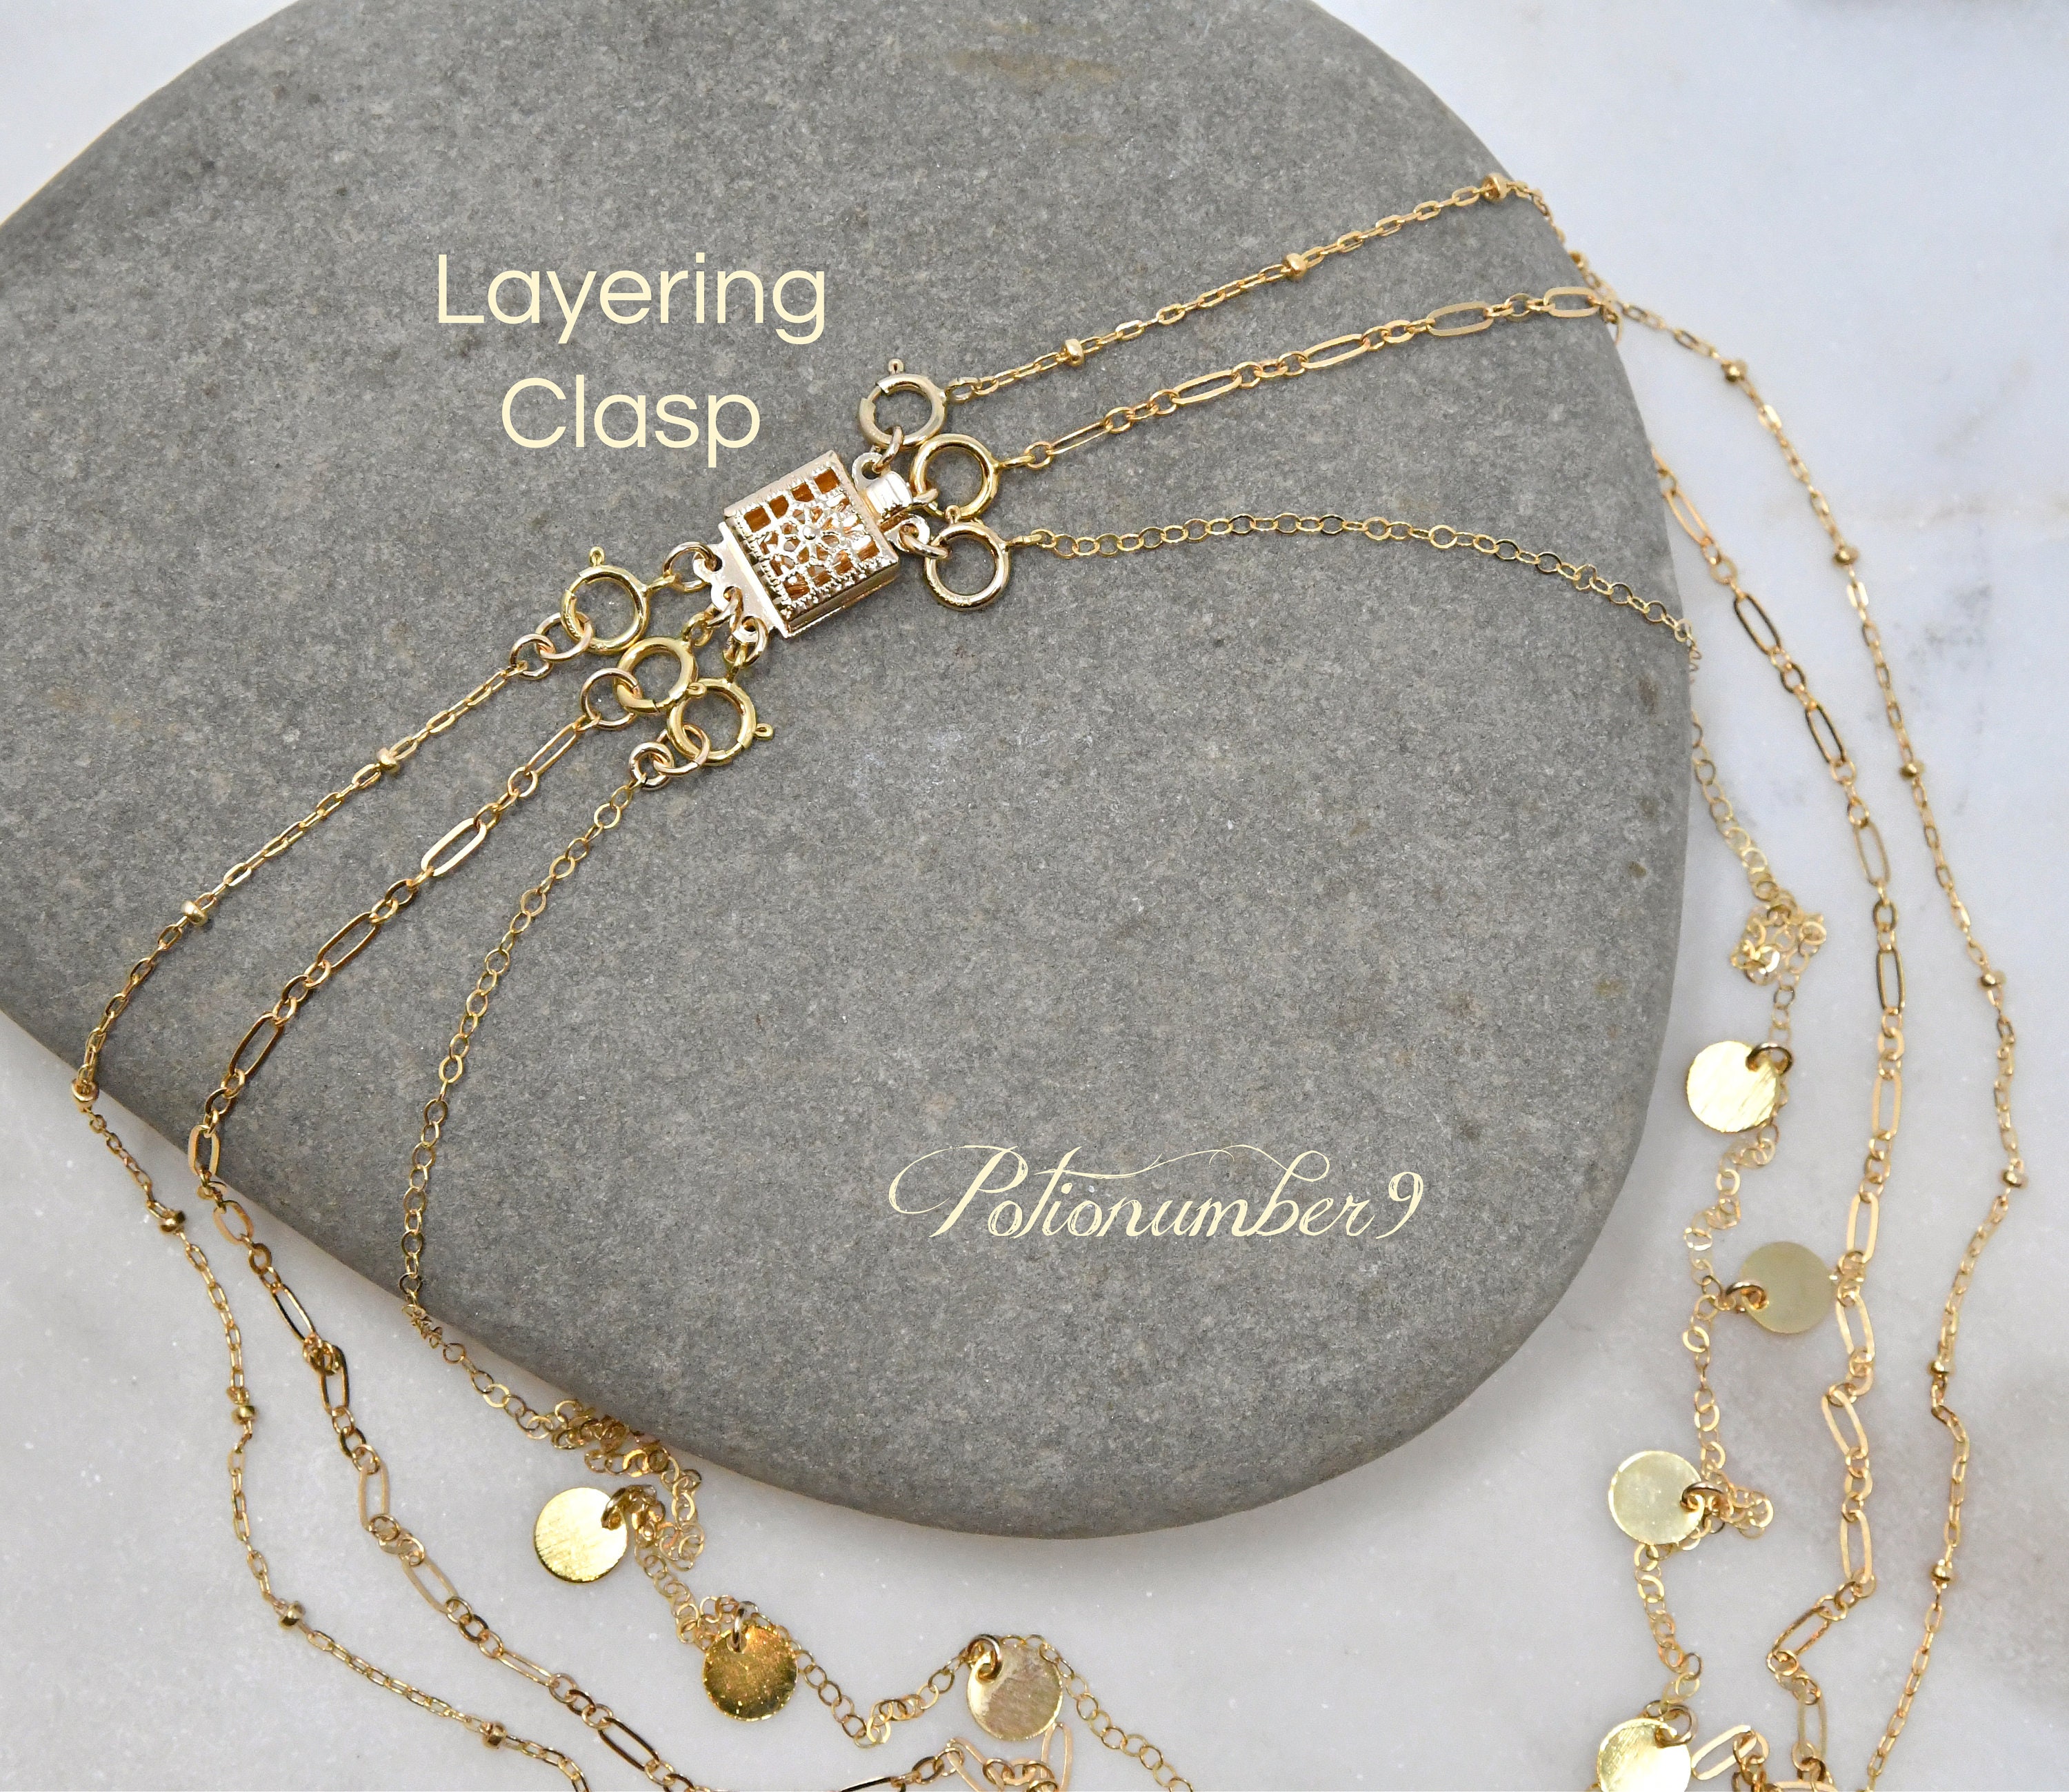  Moeuonb 2 Pieces Upgraded Necklace Layering Clasps + 6